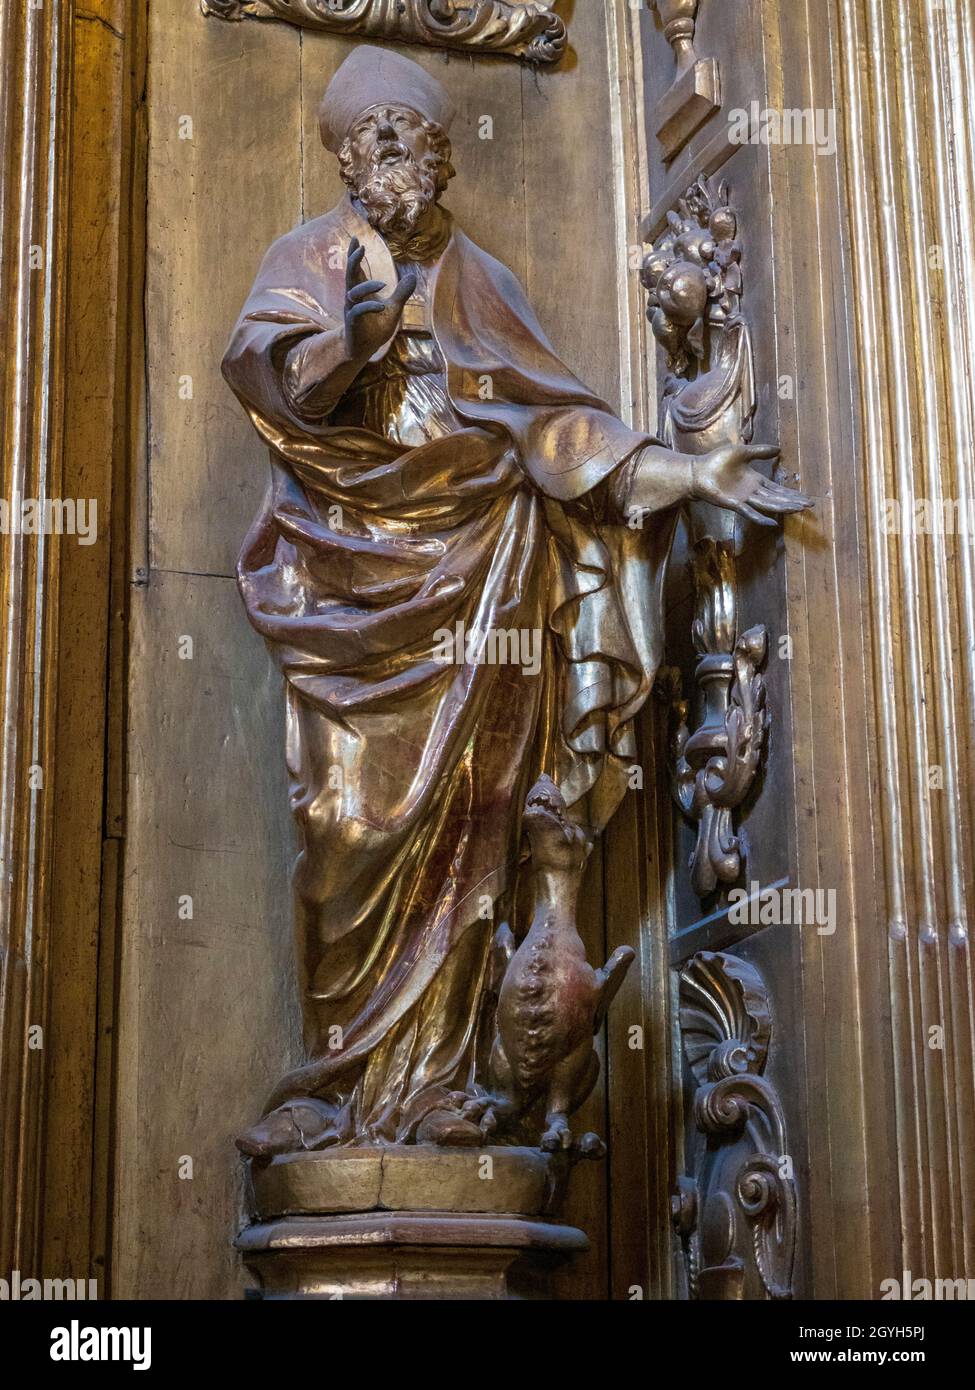 Statue of Saint Véran as bishop in the chapel dedicated to him in the cathedral of Cavaillon, Cathédrale Notre-Dame-et-Saint-Véran, Cavaillon, France. Stock Photo